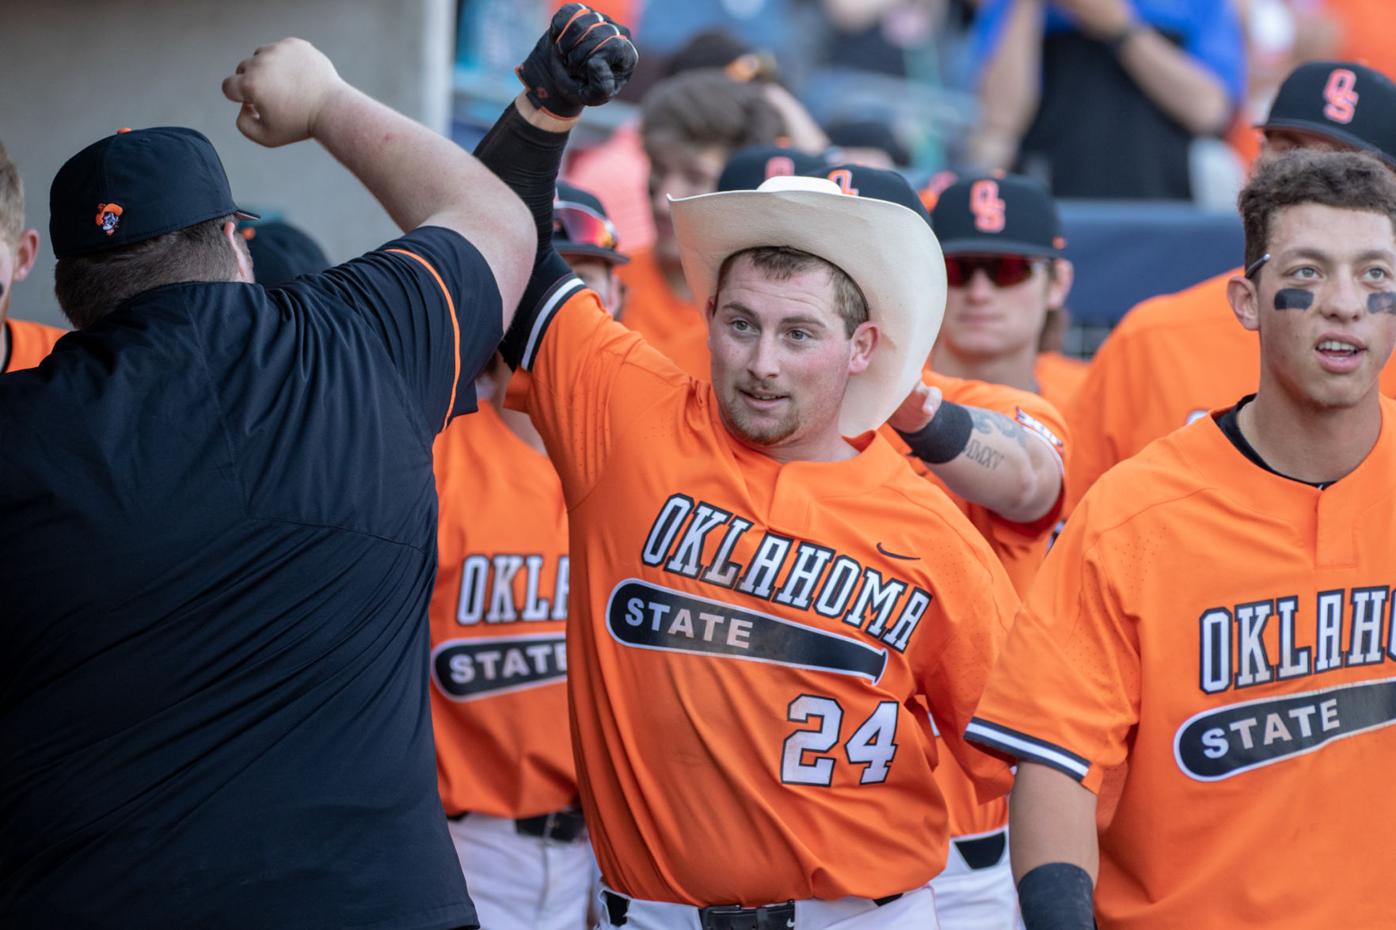 Oklahoma State baseball celebrates HRs with a cowboy hat, stick horse